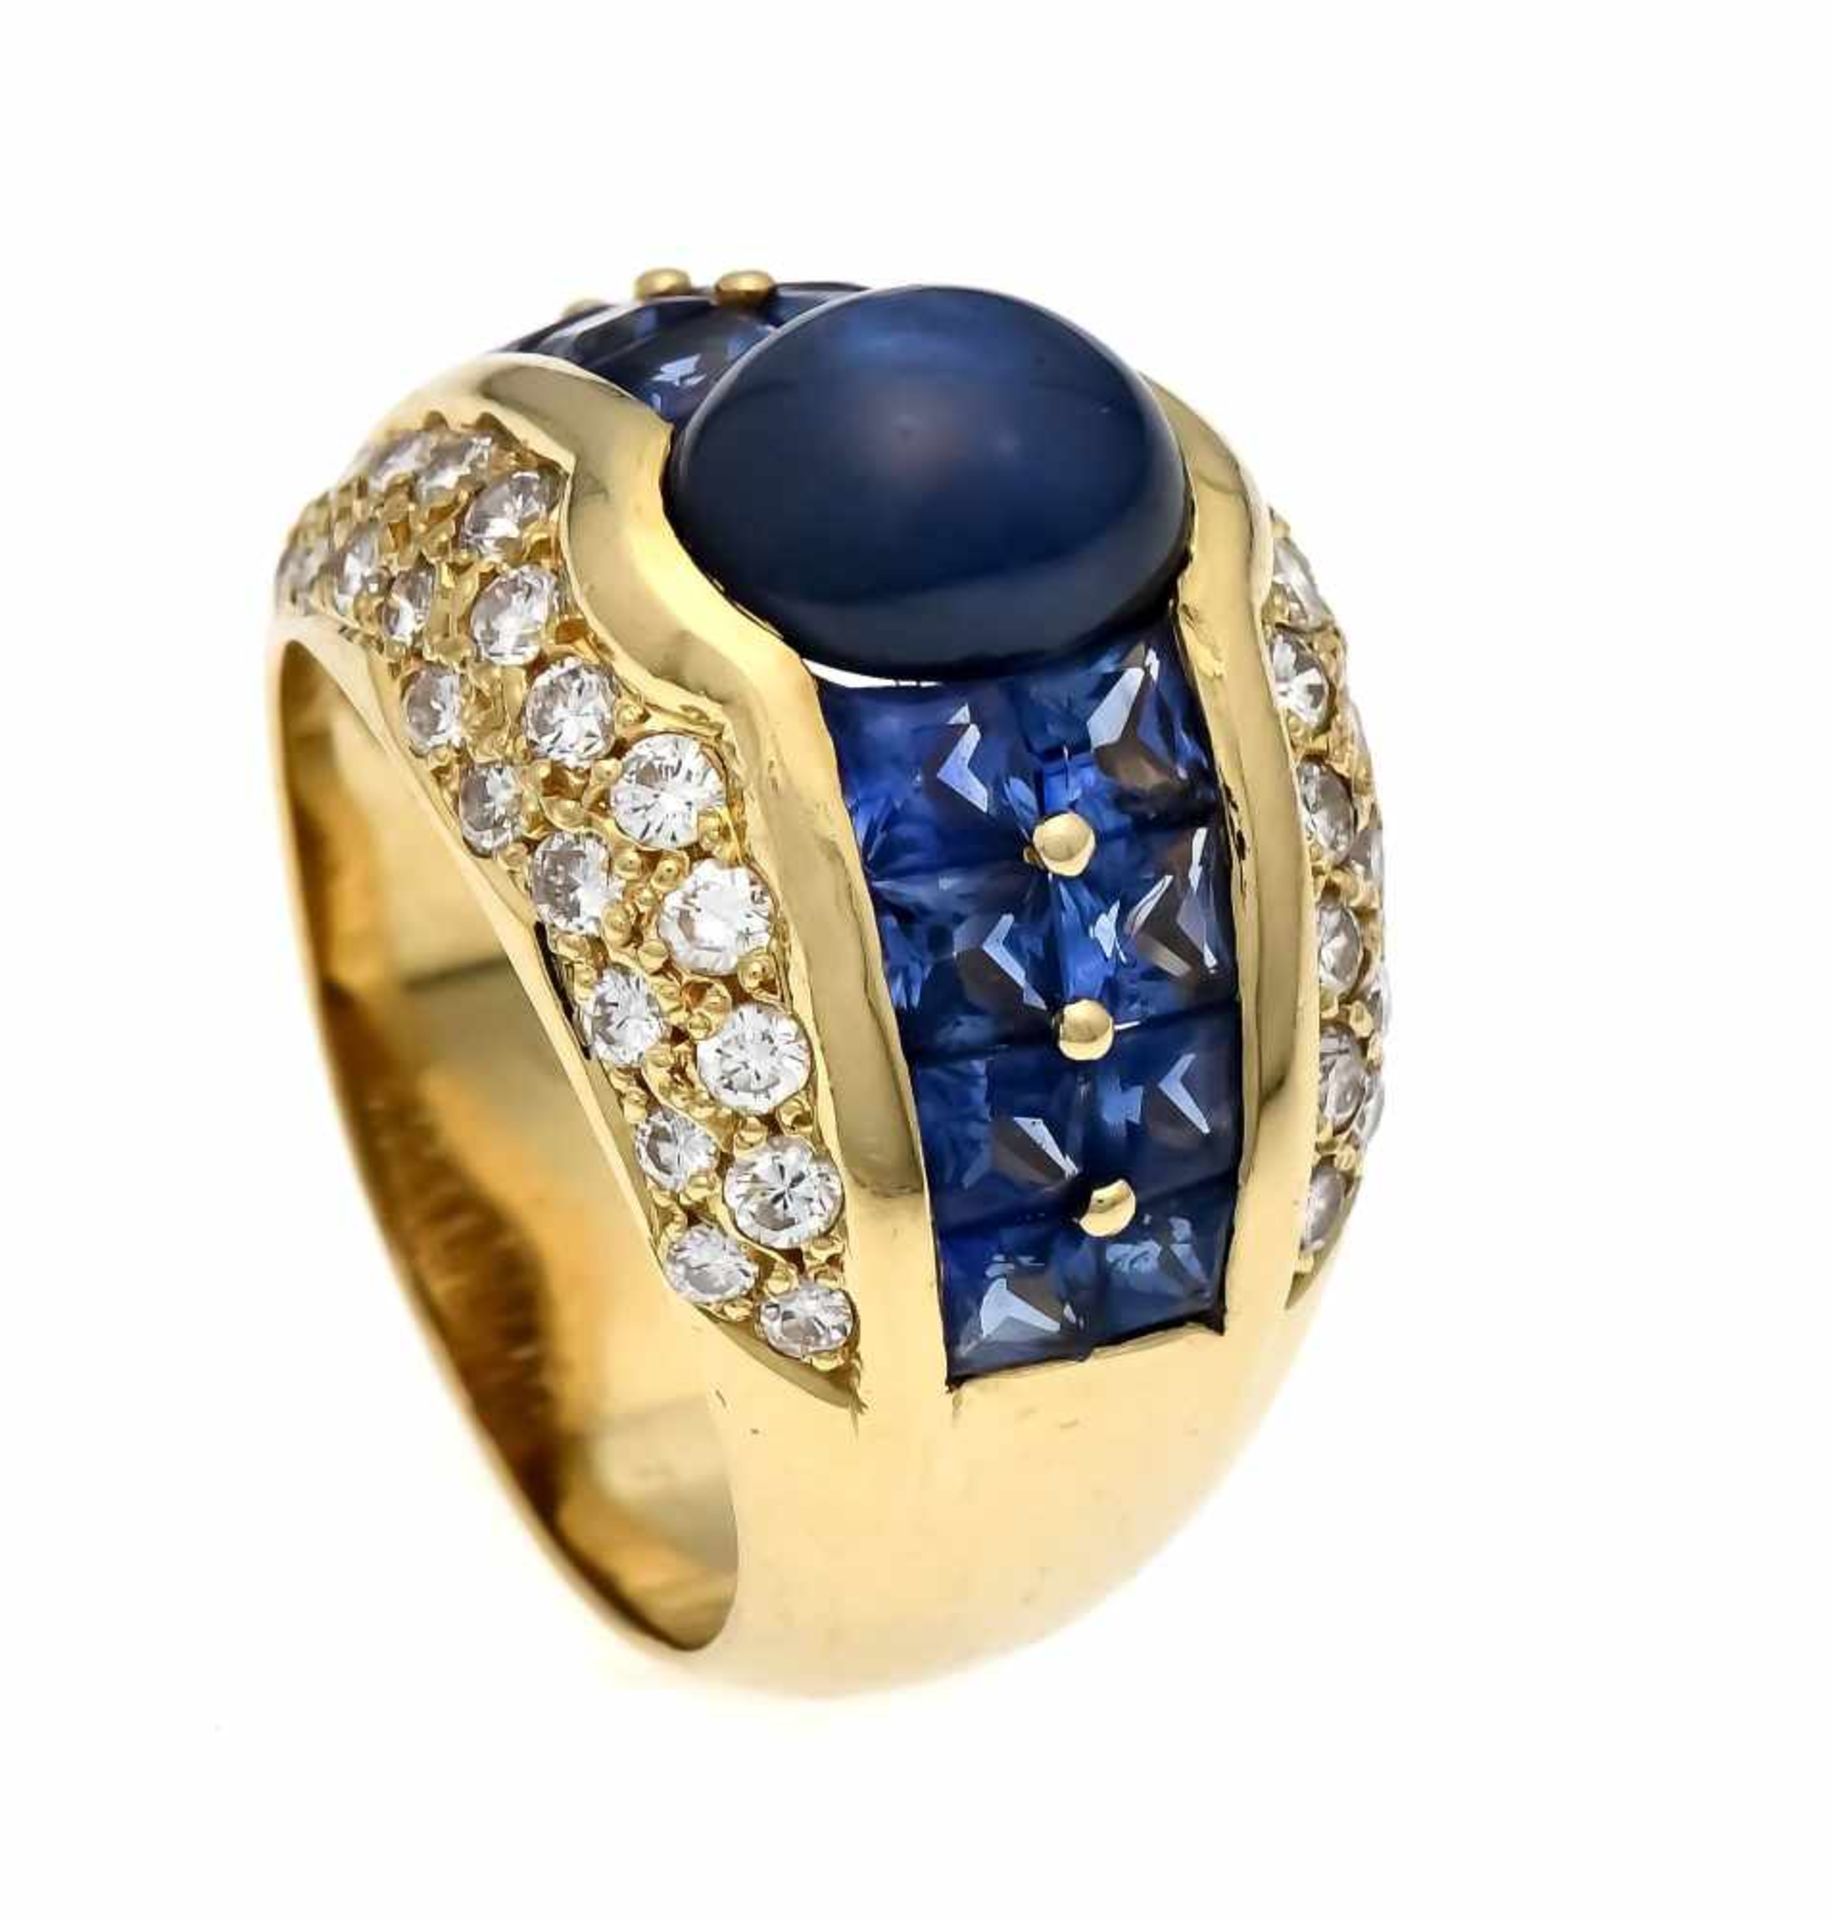 Sapphire-diamond ring GG 750/000 with an oval sapphire cabochon 8 mm and 16 fac. Sapphire